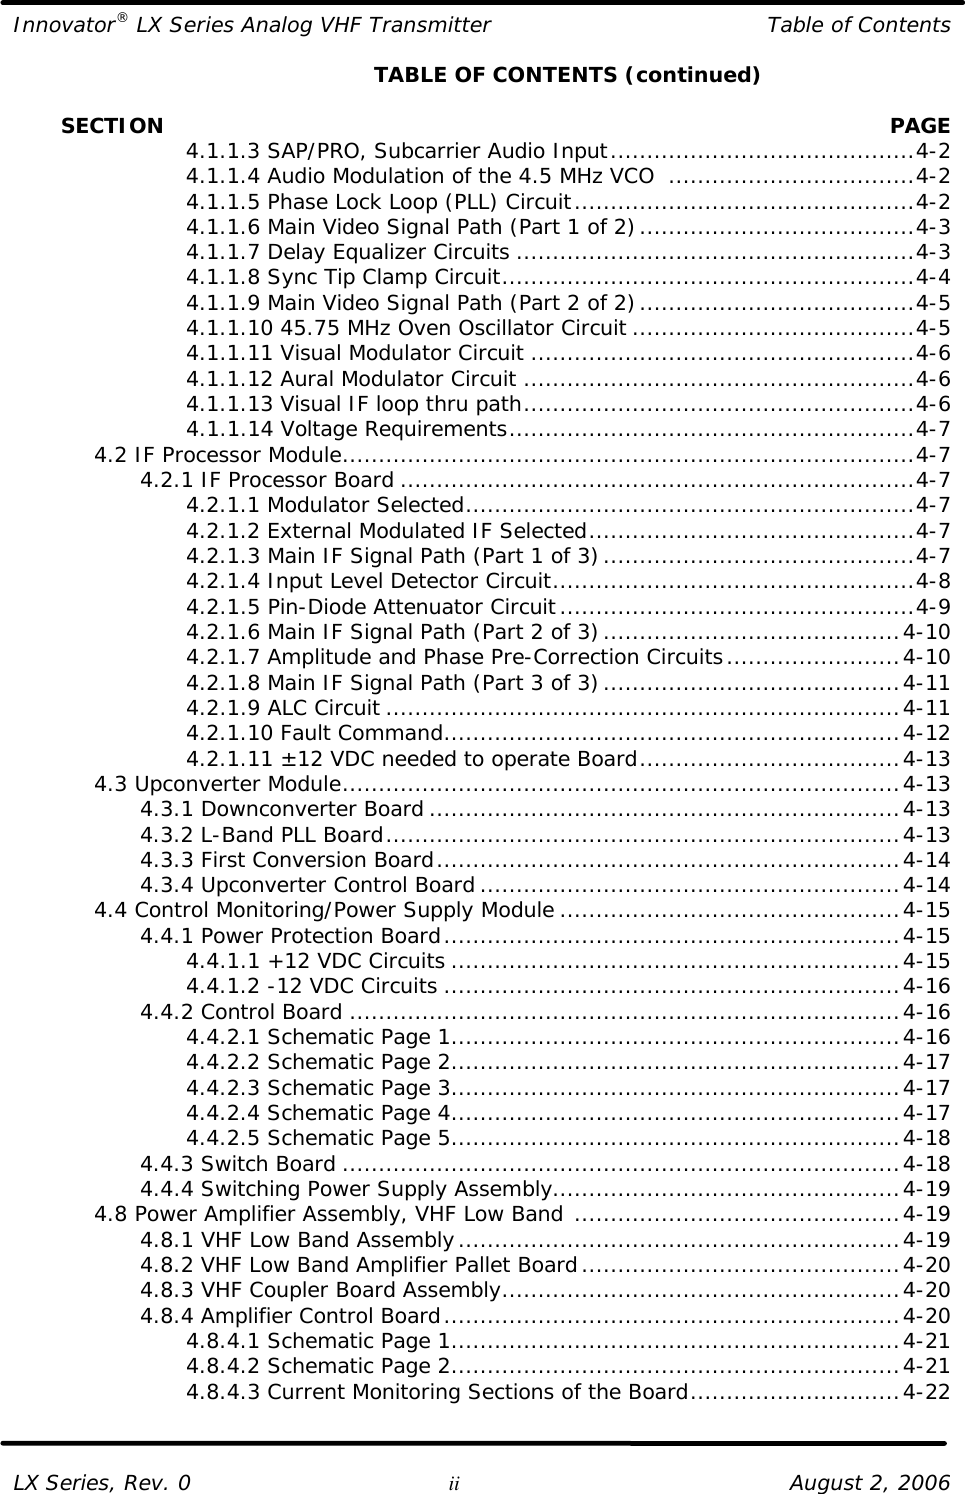 Innovator® LX Series Analog VHF Transmitter Table of Contents  LX Series, Rev. 0 ii August 2, 2006     TABLE OF CONTENTS (continued)         SECTION    PAGE     4.1.1.3 SAP/PRO, Subcarrier Audio Input..........................................4-2     4.1.1.4 Audio Modulation of the 4.5 MHz VCO  ..................................4-2     4.1.1.5 Phase Lock Loop (PLL) Circuit...............................................4-2     4.1.1.6 Main Video Signal Path (Part 1 of 2)......................................4-3     4.1.1.7 Delay Equalizer Circuits .......................................................4-3     4.1.1.8 Sync Tip Clamp Circuit.........................................................4-4     4.1.1.9 Main Video Signal Path (Part 2 of 2)......................................4-5     4.1.1.10 45.75 MHz Oven Oscillator Circuit .......................................4-5     4.1.1.11 Visual Modulator Circuit .....................................................4-6     4.1.1.12 Aural Modulator Circuit ......................................................4-6     4.1.1.13 Visual IF loop thru path......................................................4-6     4.1.1.14 Voltage Requirements........................................................4-7  4.2 IF Processor Module...............................................................................4-7     4.2.1 IF Processor Board .......................................................................4-7     4.2.1.1 Modulator Selected..............................................................4-7     4.2.1.2 External Modulated IF Selected.............................................4-7     4.2.1.3 Main IF Signal Path (Part 1 of 3)...........................................4-7     4.2.1.4 Input Level Detector Circuit..................................................4-8     4.2.1.5 Pin-Diode Attenuator Circuit.................................................4-9     4.2.1.6 Main IF Signal Path (Part 2 of 3).........................................4-10     4.2.1.7 Amplitude and Phase Pre-Correction Circuits........................4-10     4.2.1.8 Main IF Signal Path (Part 3 of 3).........................................4-11     4.2.1.9 ALC Circuit .......................................................................4-11     4.2.1.10 Fault Command...............................................................4-12     4.2.1.11 ±12 VDC needed to operate Board....................................4-13  4.3 Upconverter Module.............................................................................4-13     4.3.1 Downconverter Board .................................................................4-13     4.3.2 L-Band PLL Board.......................................................................4-13     4.3.3 First Conversion Board................................................................4-14     4.3.4 Upconverter Control Board ..........................................................4-14  4.4 Control Monitoring/Power Supply Module ...............................................4-15     4.4.1 Power Protection Board...............................................................4-15     4.4.1.1 +12 VDC Circuits ..............................................................4-15     4.4.1.2 -12 VDC Circuits ...............................................................4-16     4.4.2 Control Board ............................................................................4-16     4.4.2.1 Schematic Page 1..............................................................4-16     4.4.2.2 Schematic Page 2..............................................................4-17     4.4.2.3 Schematic Page 3..............................................................4-17     4.4.2.4 Schematic Page 4..............................................................4-17     4.4.2.5 Schematic Page 5..............................................................4-18     4.4.3 Switch Board .............................................................................4-18     4.4.4 Switching Power Supply Assembly................................................4-19  4.8 Power Amplifier Assembly, VHF Low Band .............................................4-19     4.8.1 VHF Low Band Assembly.............................................................4-19     4.8.2 VHF Low Band Amplifier Pallet Board............................................4-20     4.8.3 VHF Coupler Board Assembly.......................................................4-20     4.8.4 Amplifier Control Board...............................................................4-20     4.8.4.1 Schematic Page 1..............................................................4-21     4.8.4.2 Schematic Page 2..............................................................4-21     4.8.4.3 Current Monitoring Sections of the Board.............................4-22   